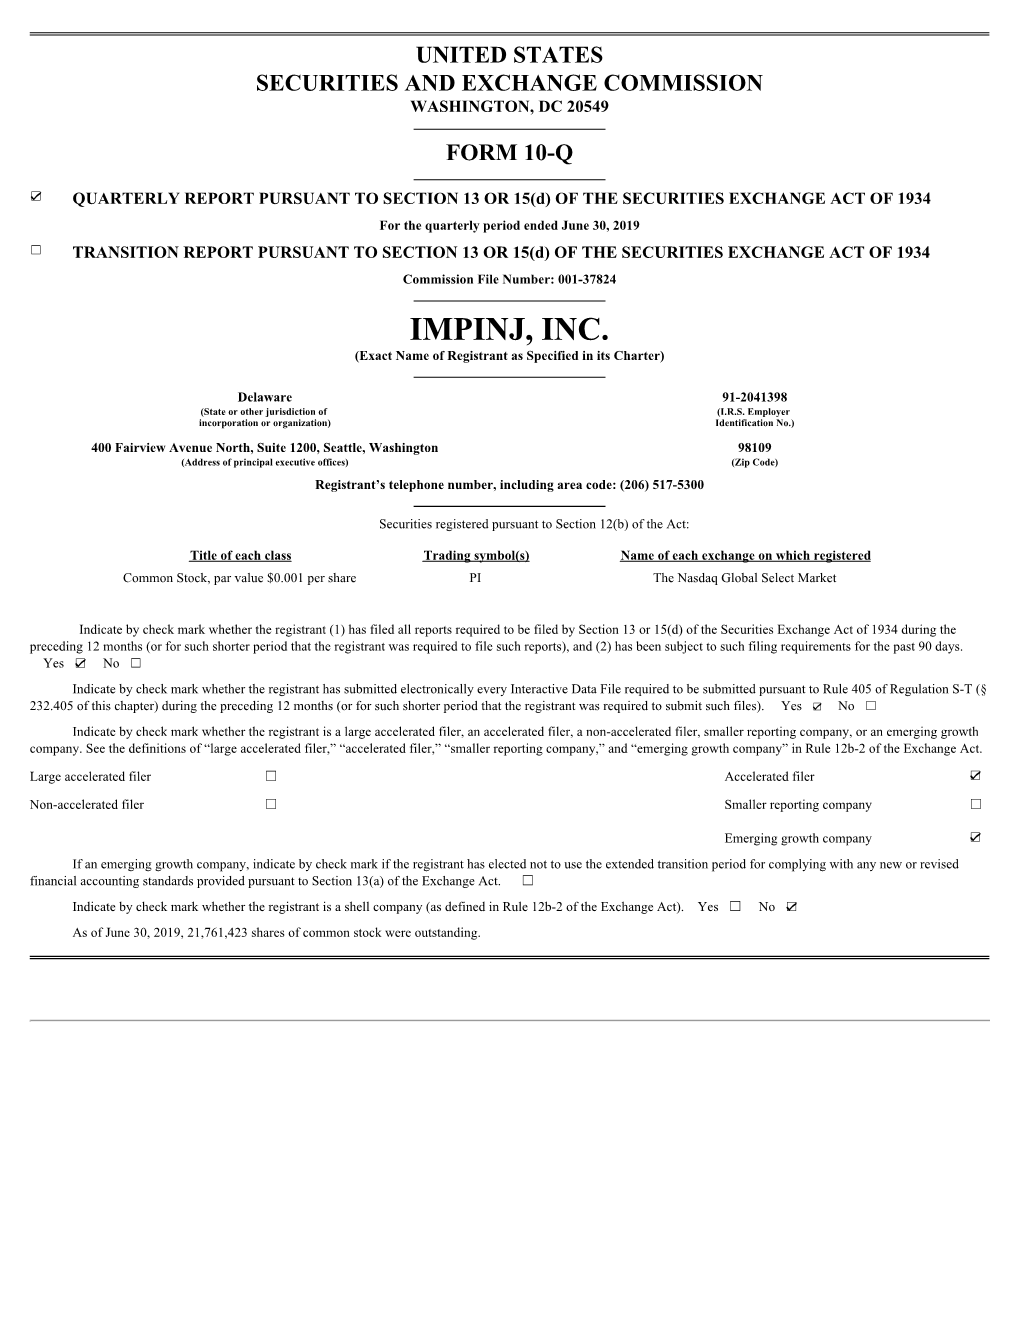 IMPINJ, INC. (Exact Name of Registrant As Specified in Its Charter)